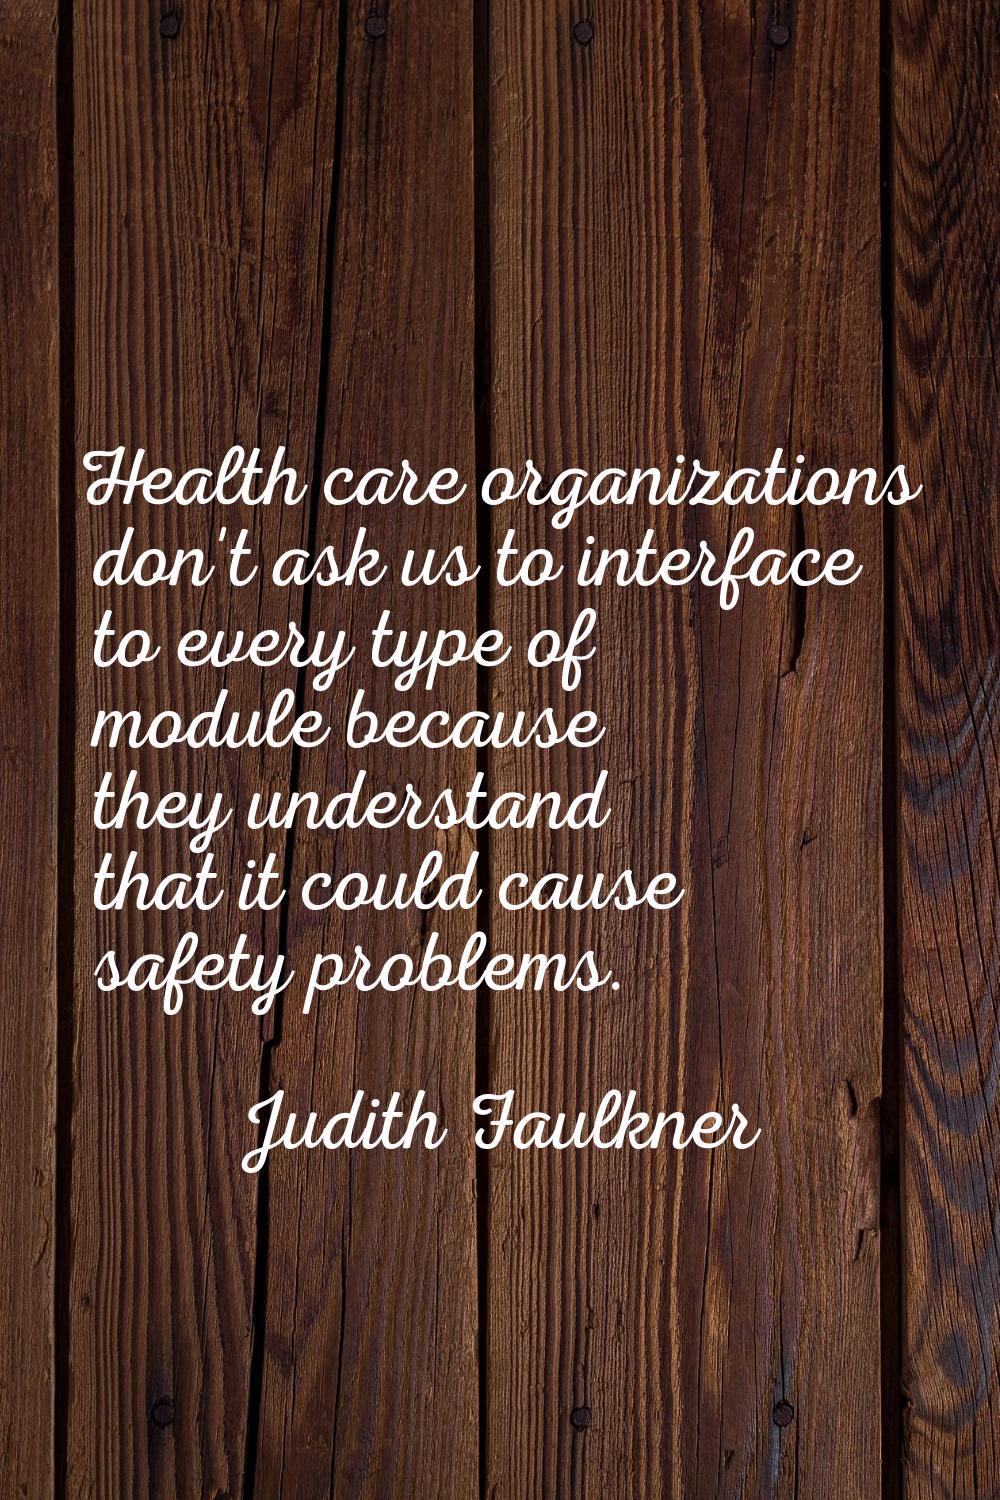 Health care organizations don't ask us to interface to every type of module because they understand